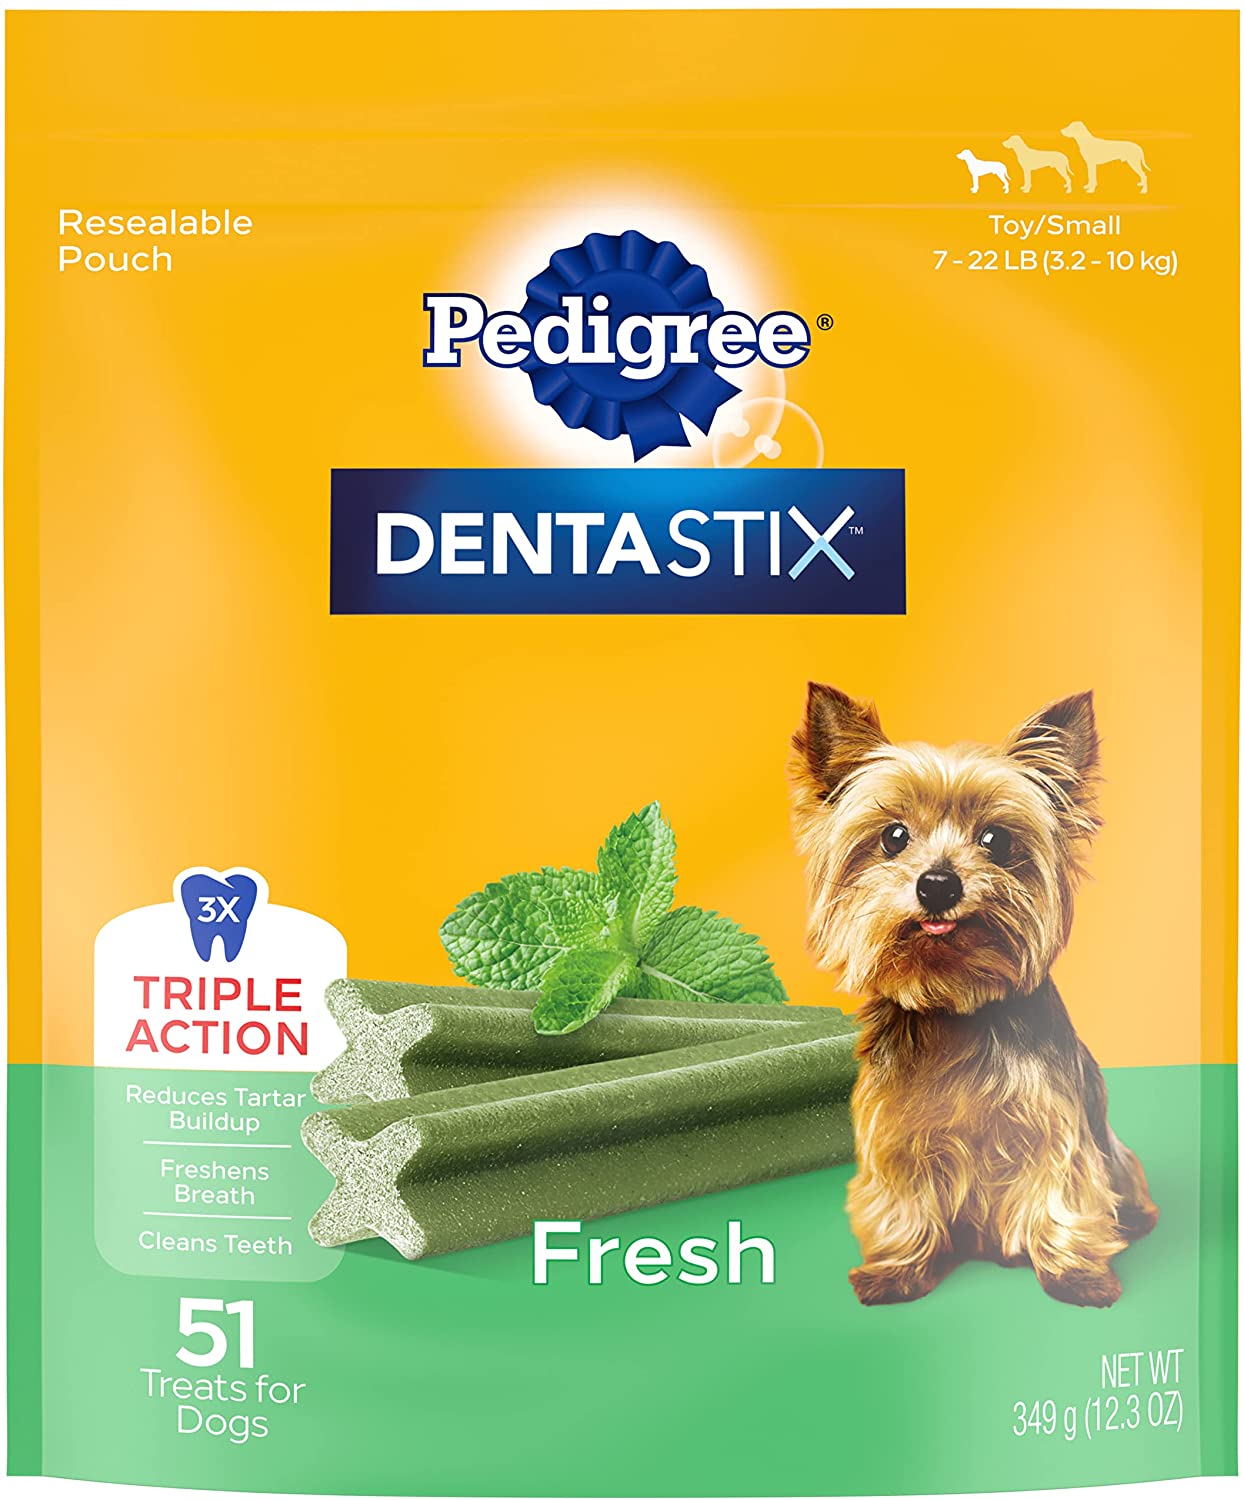 51-Count (12.66-Oz) Pedigree DENTASTIX Fresh Dog Treats (for Toy/Small Dogs) $6.29 + Free Shipping w/ Prime or on $25+